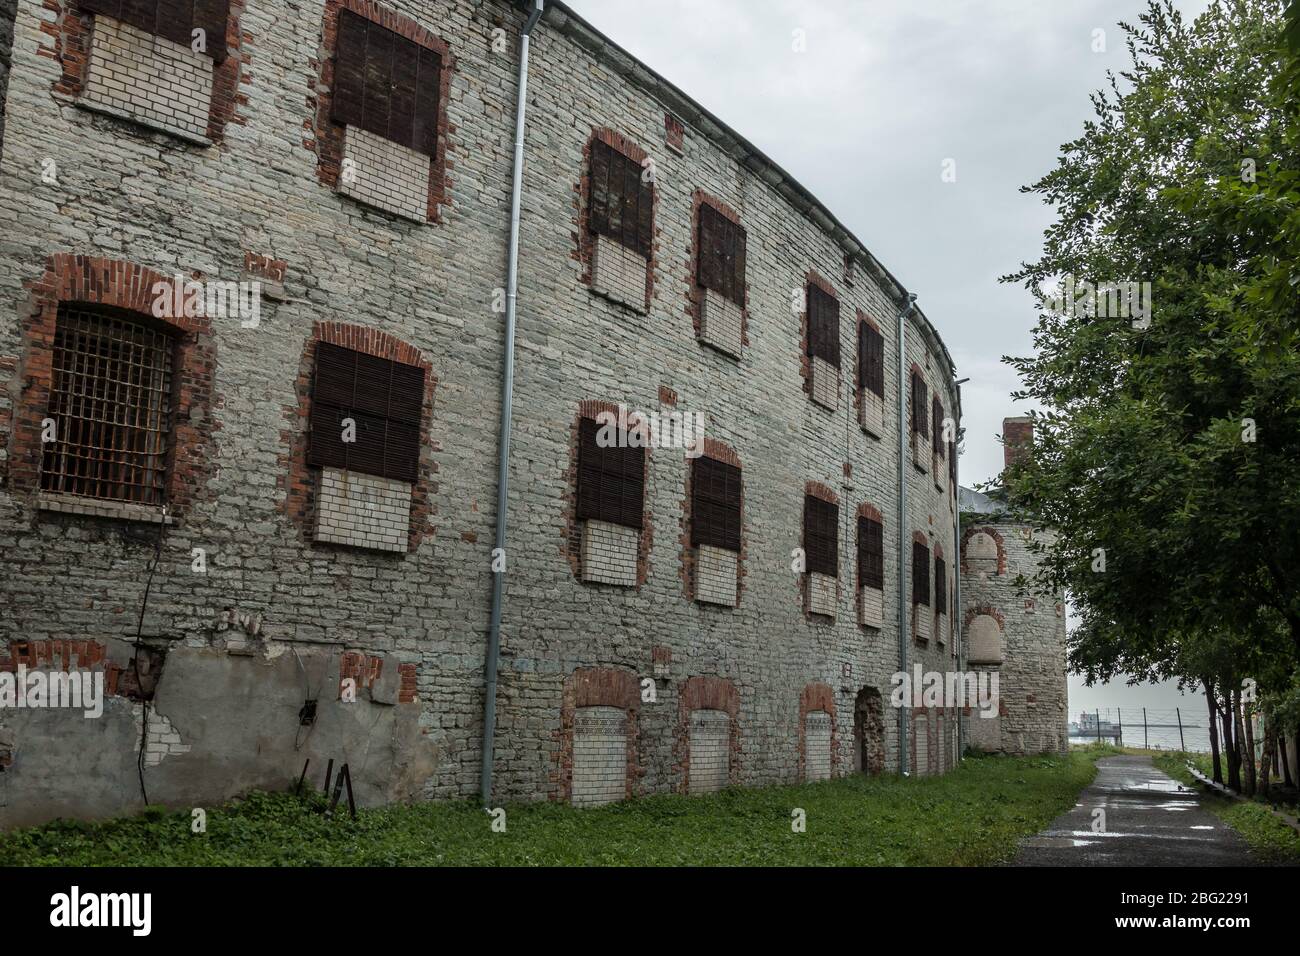 Abandoned Patarei prison. The former Soviet maximum security prison near Tallinn, Estonia, now lies decaying and empty near the capital city. Stock Photo